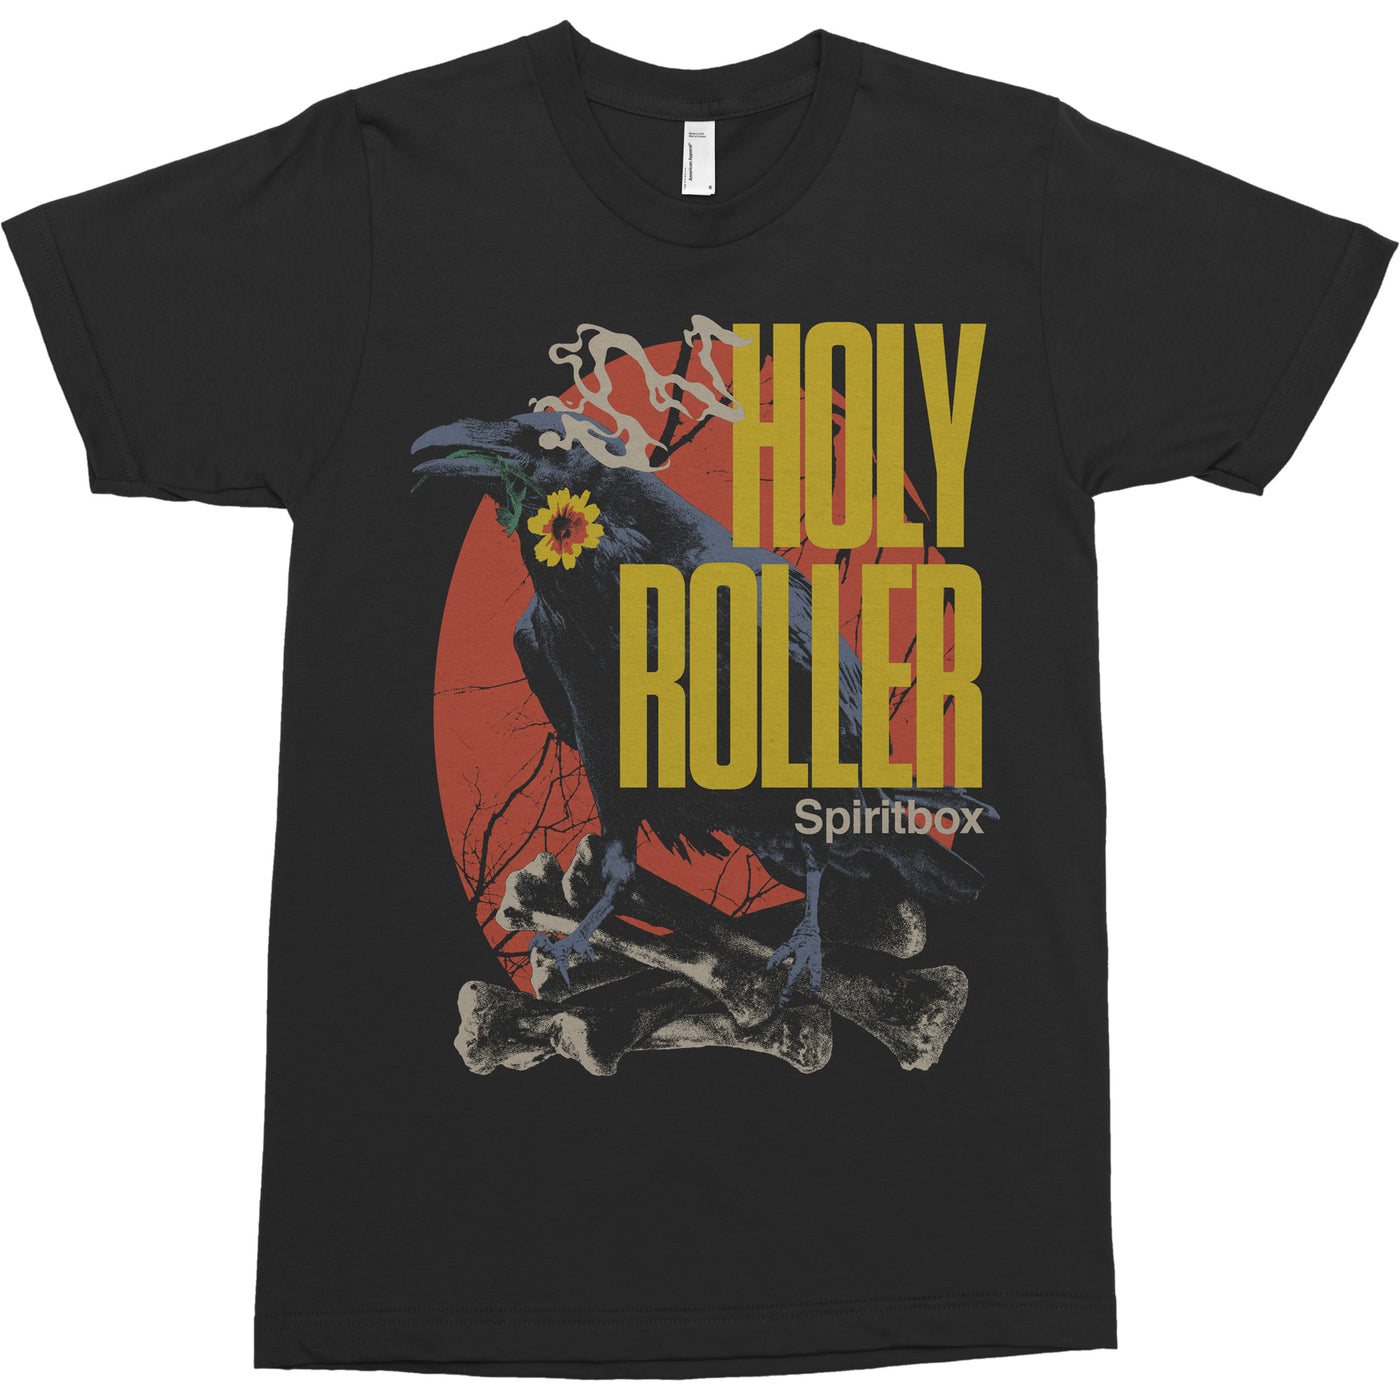 Holy Roller Crow Black